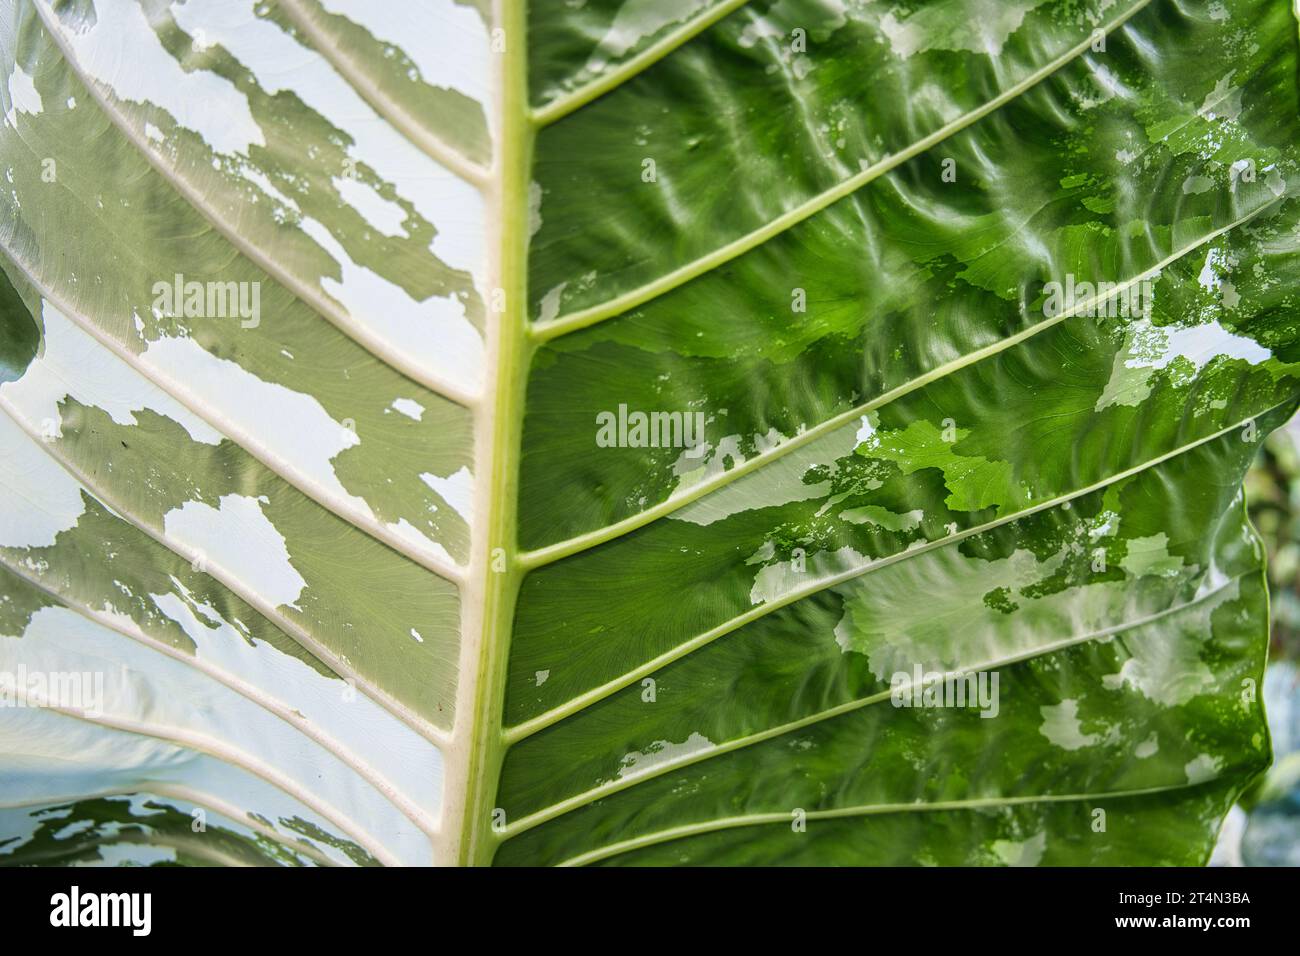 Alocasia Macrorrhiza Camouflage, Albo Variegata' is a tall growing alocasia with white variegated Stock Photo